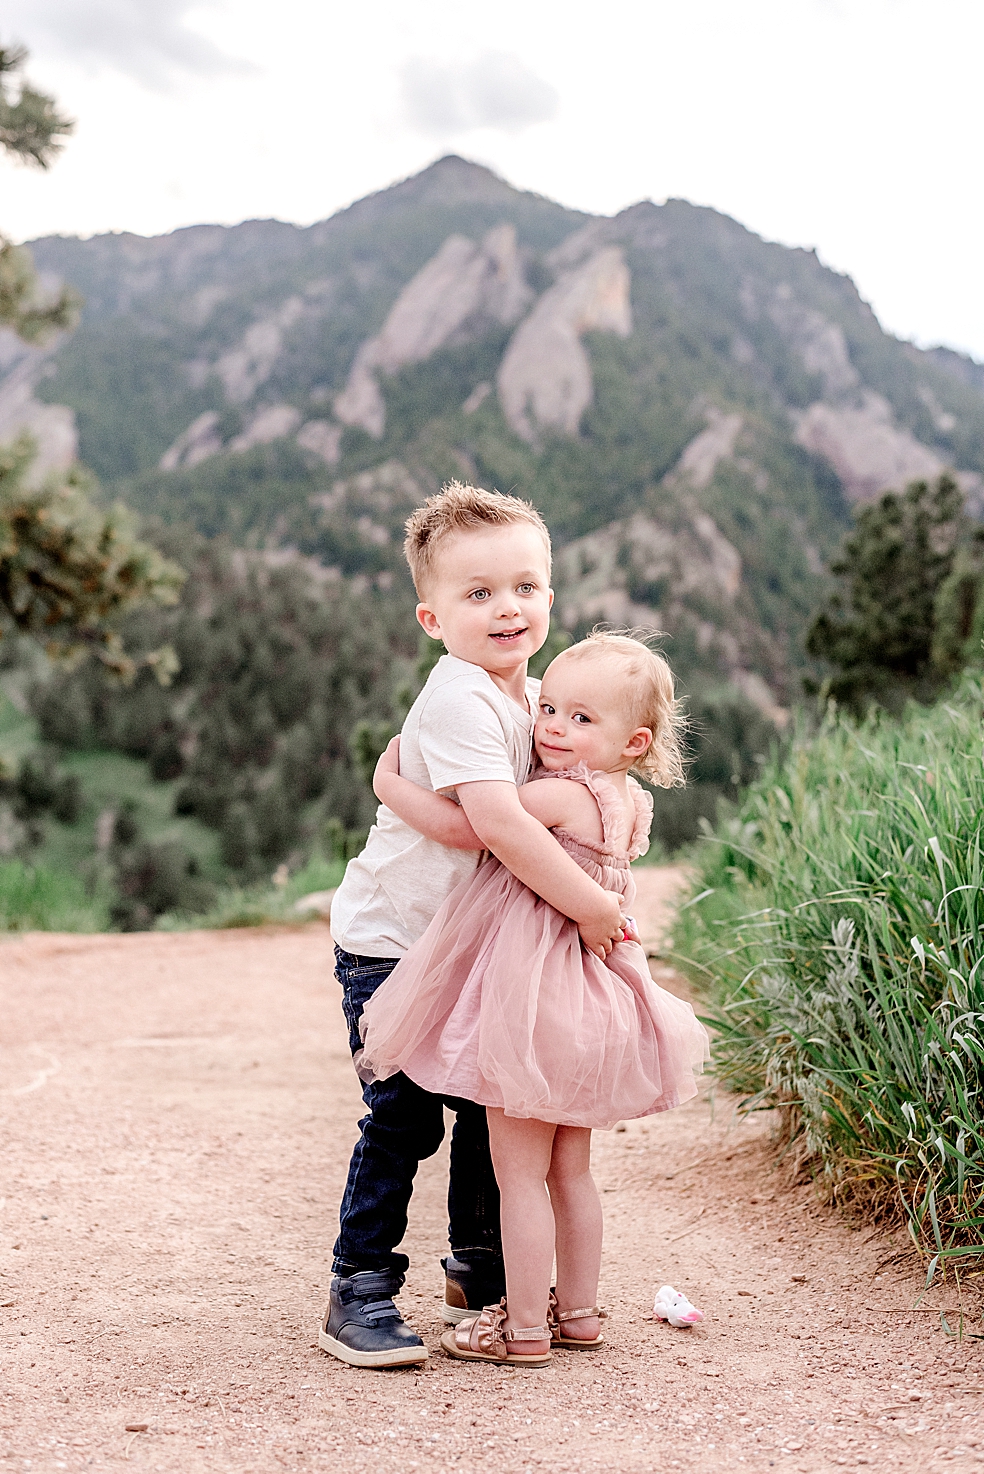 Little brother hugging sister in pink dress | Photo by Decatur Alabama Family Photographer Jessica Lee